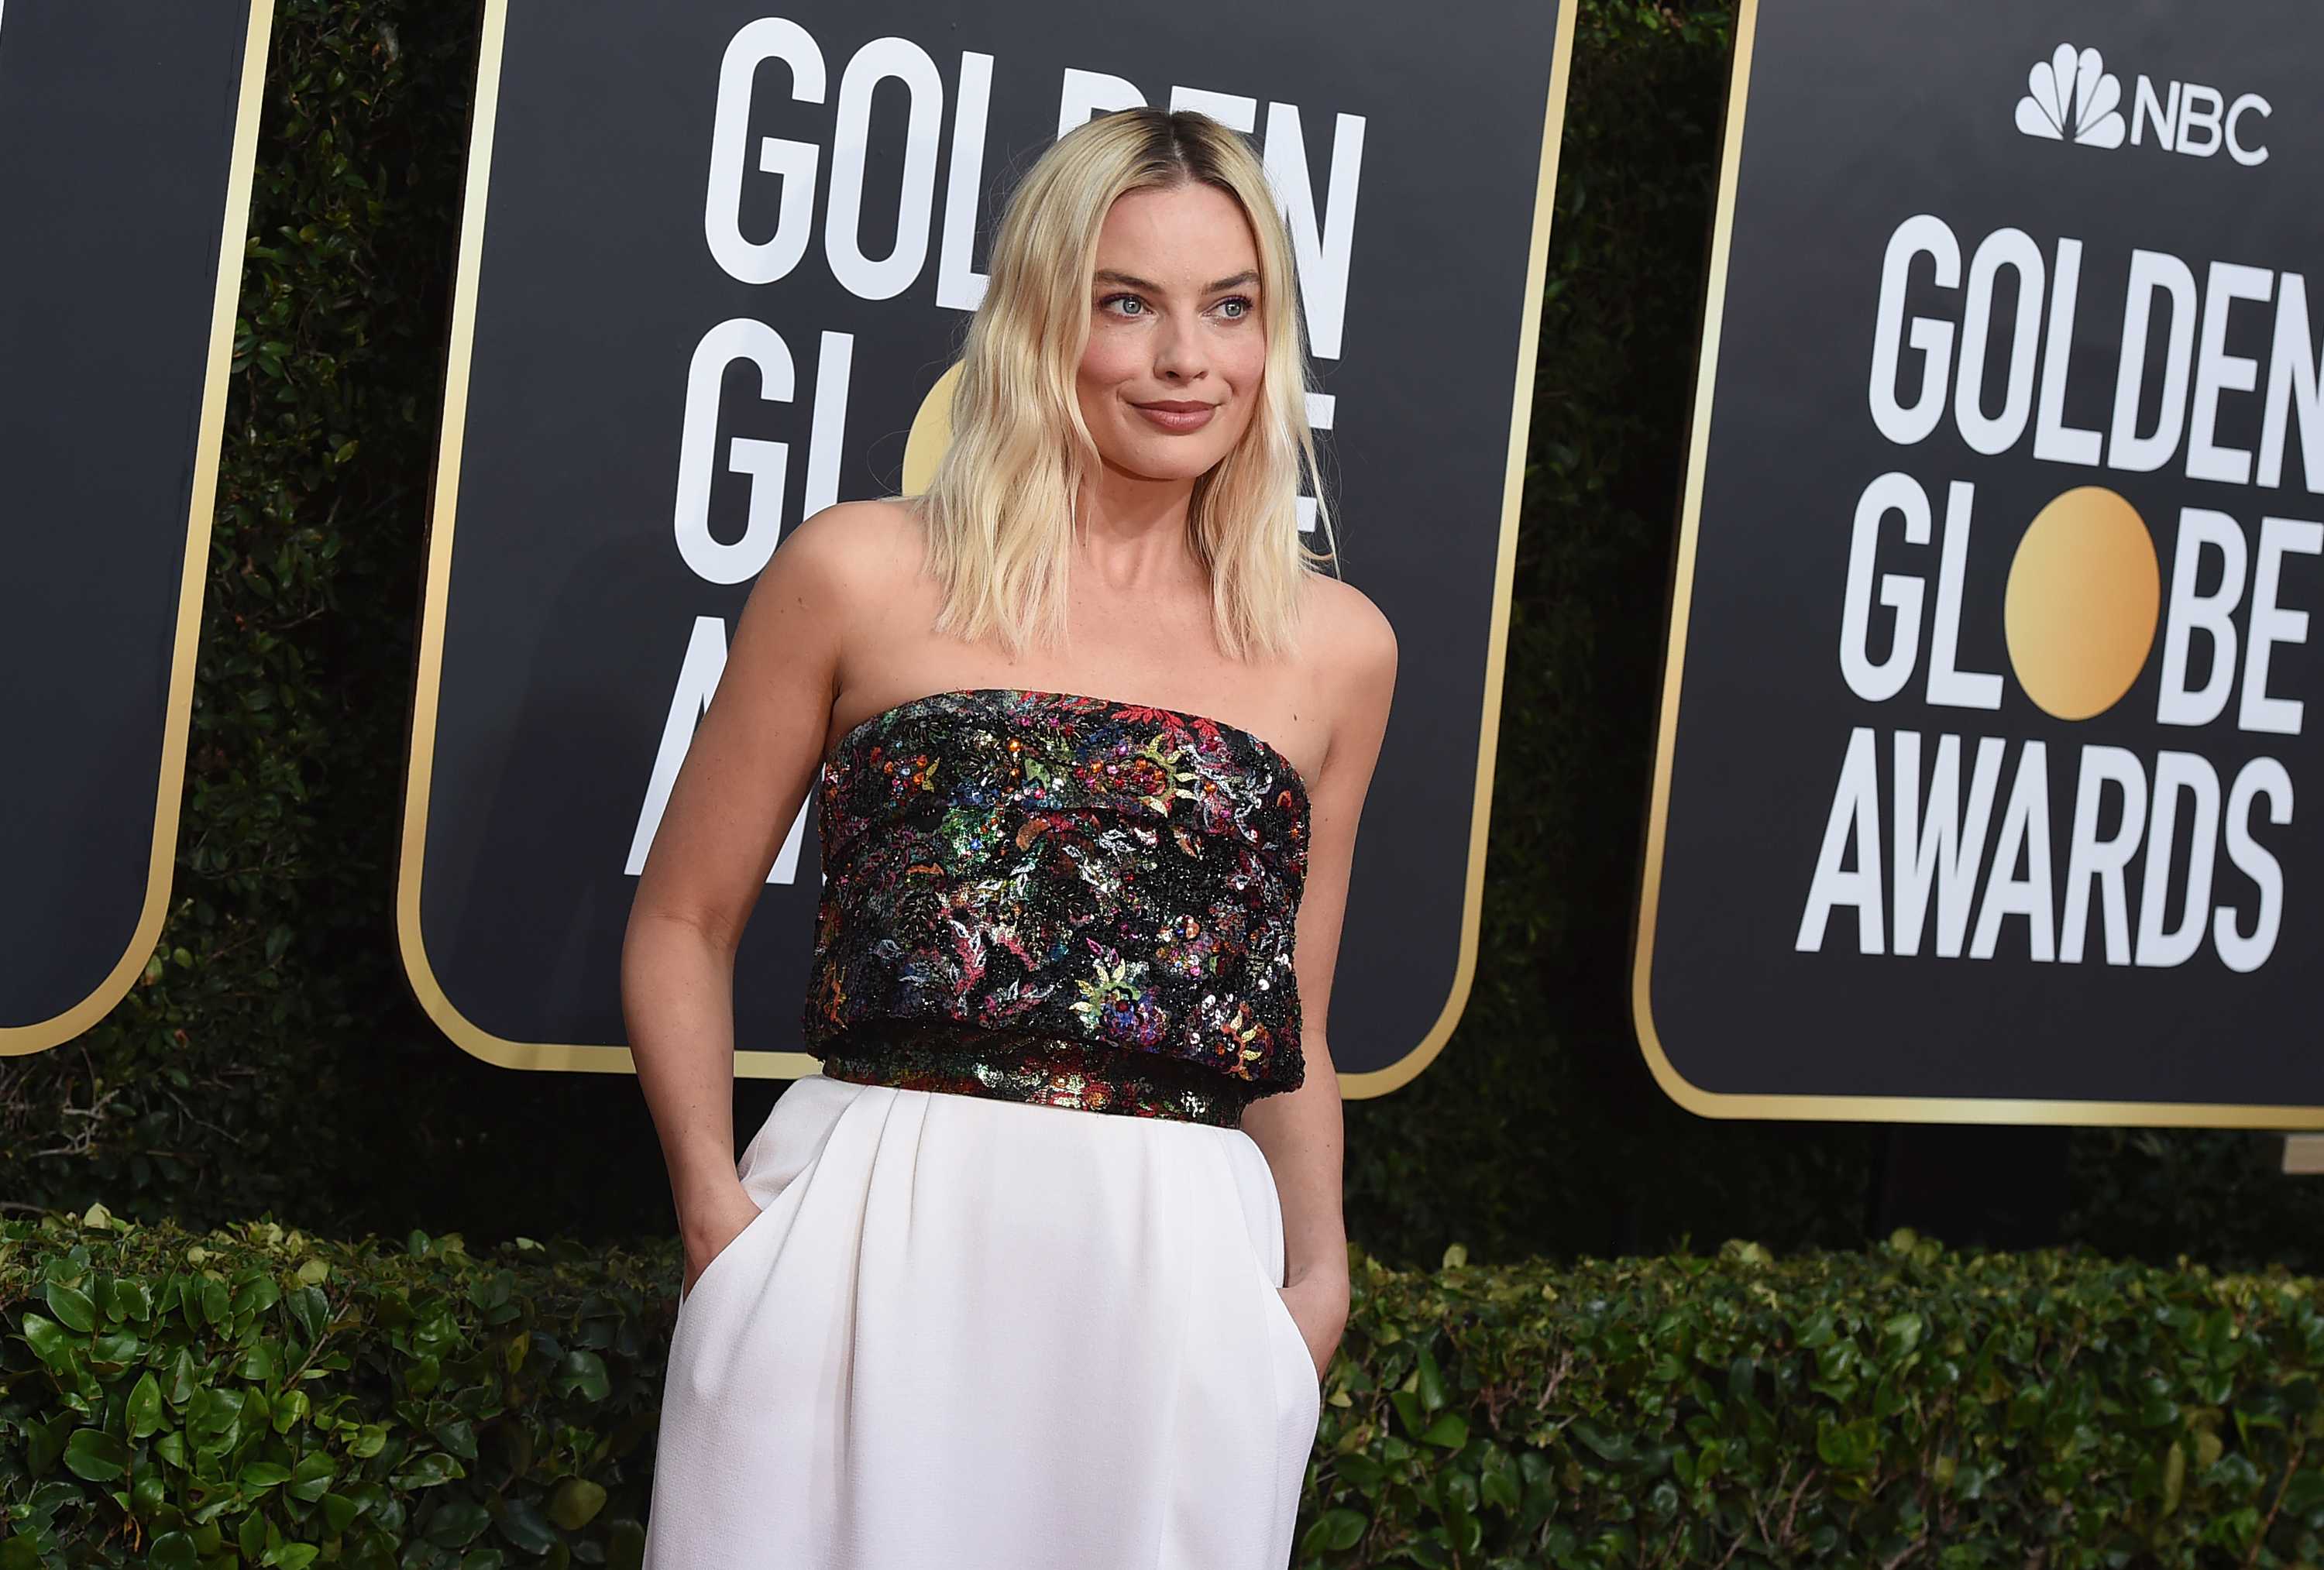 Margot Robbie smiles for the camera wearing a multi-coloured sleeveless top and a white floor-length skirt.